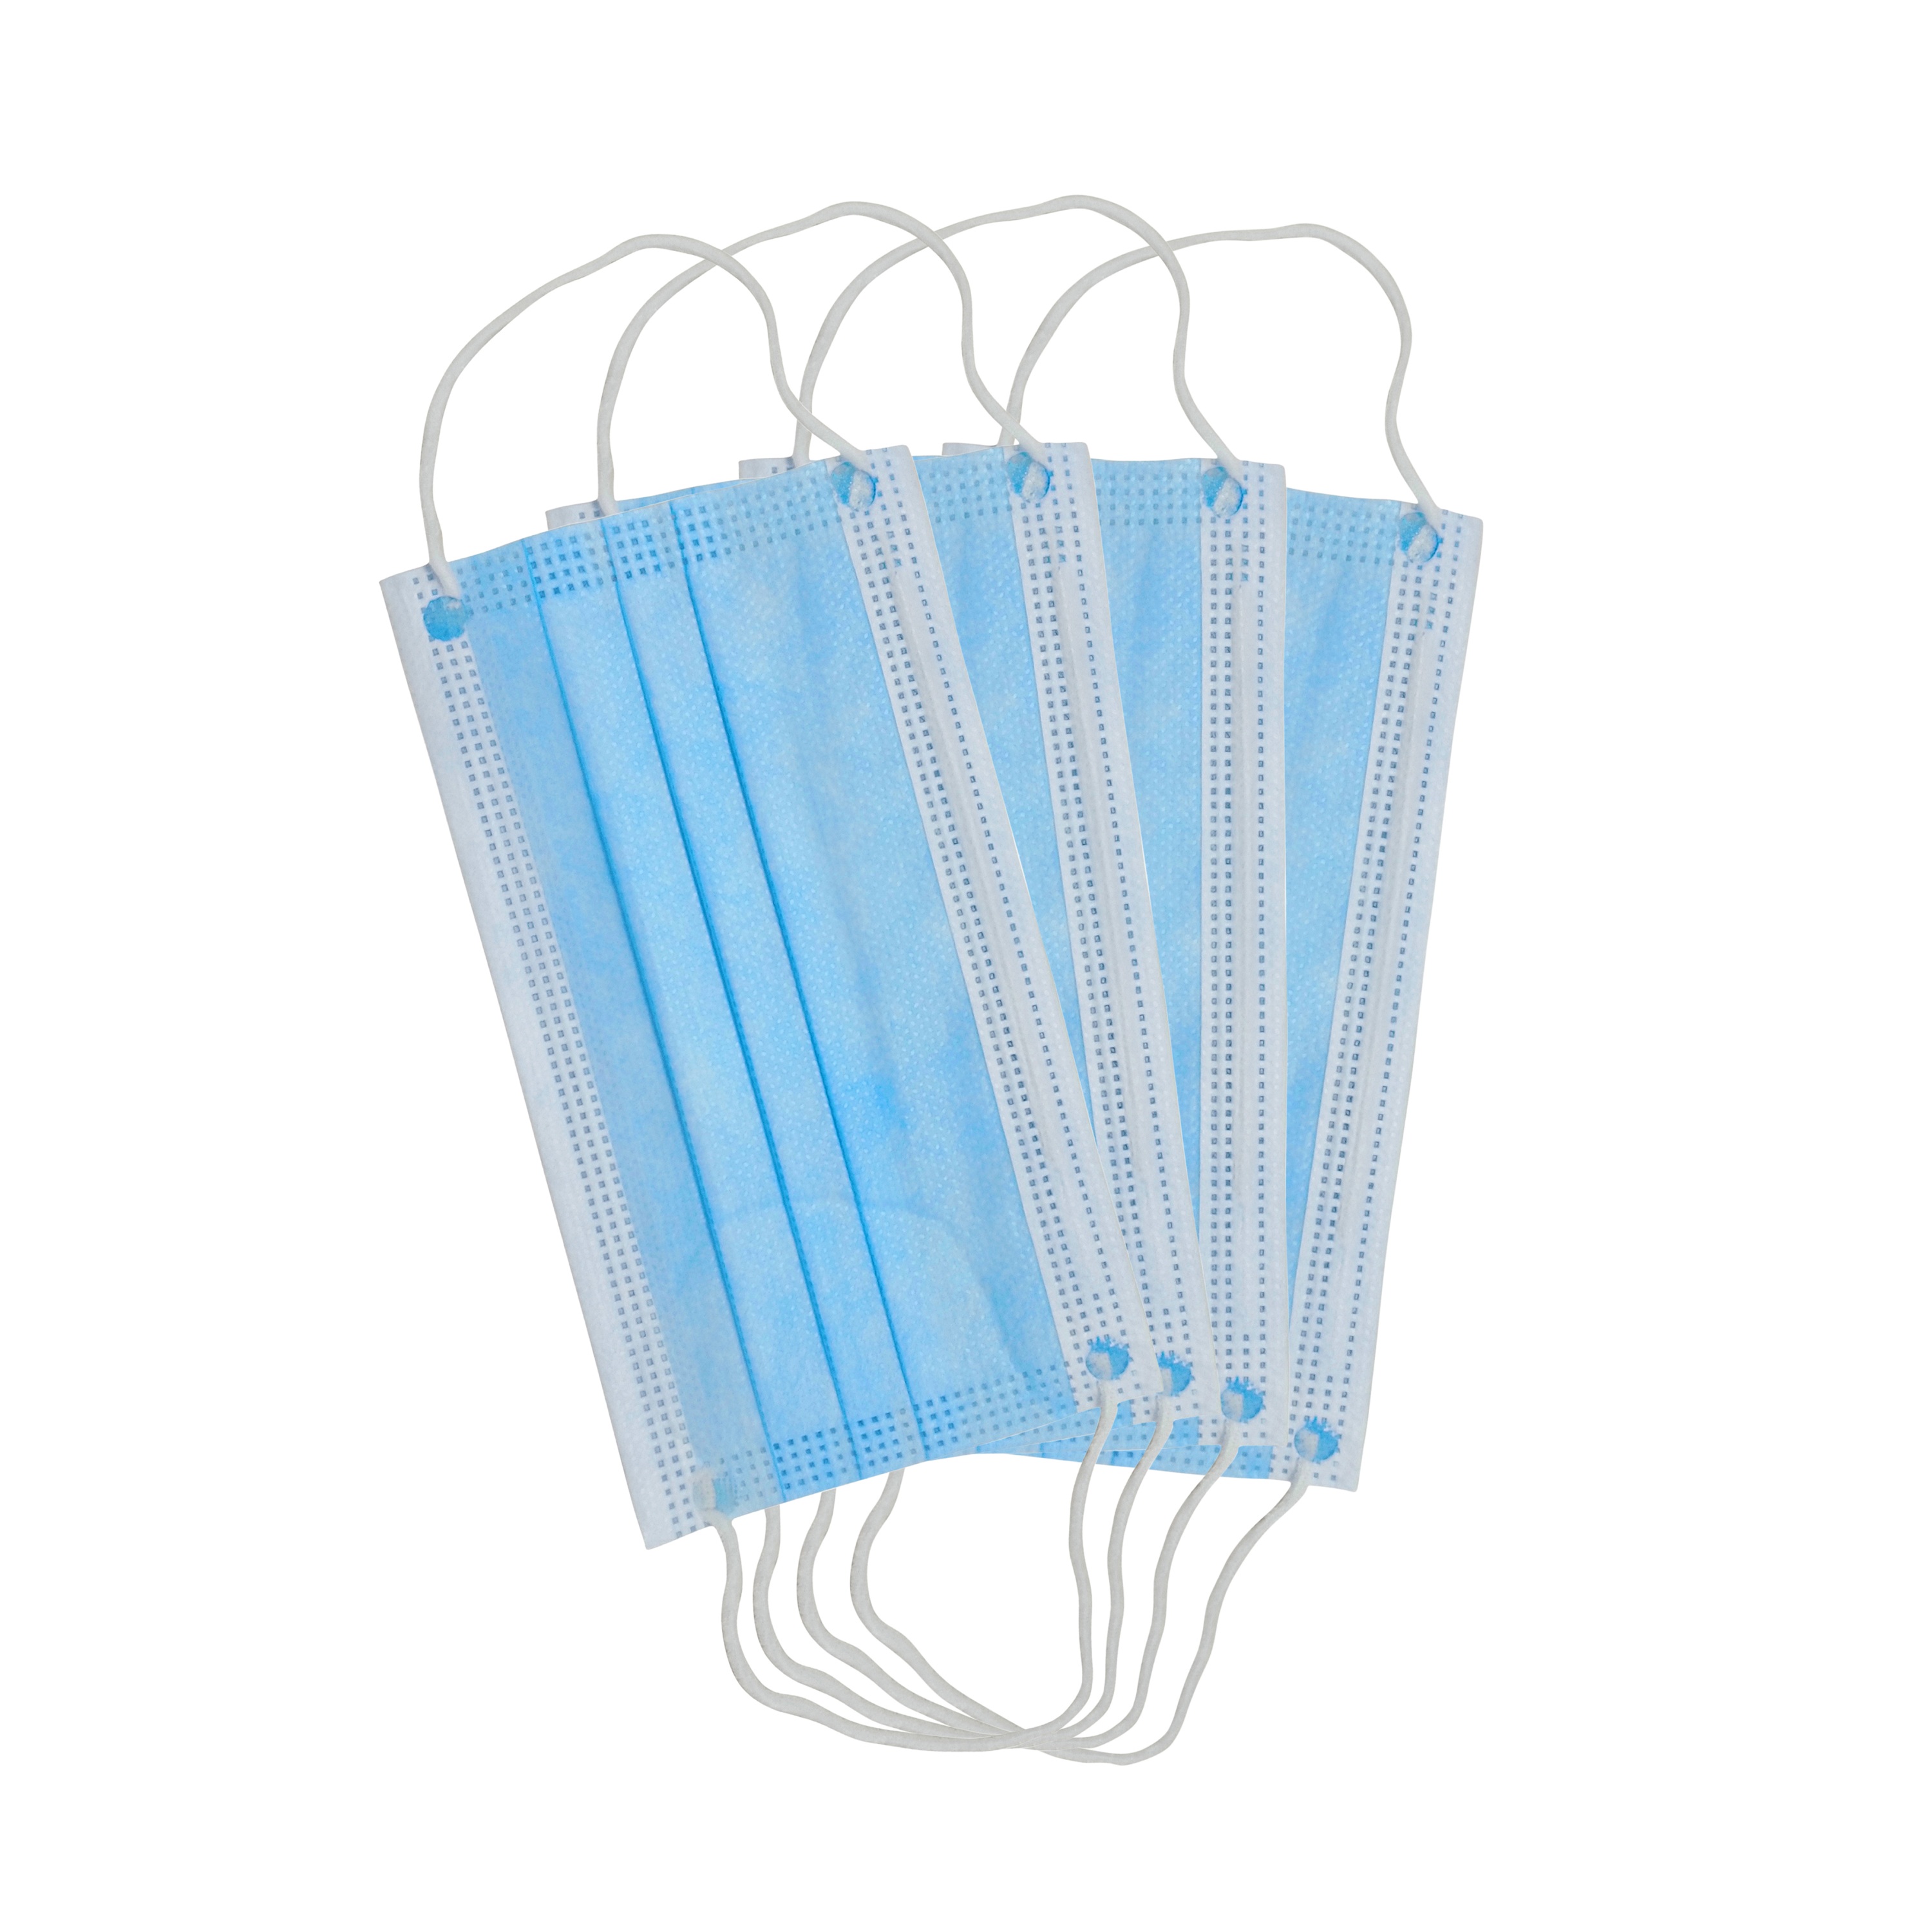 Anti-virus Disposable Medical Surgical Protection 